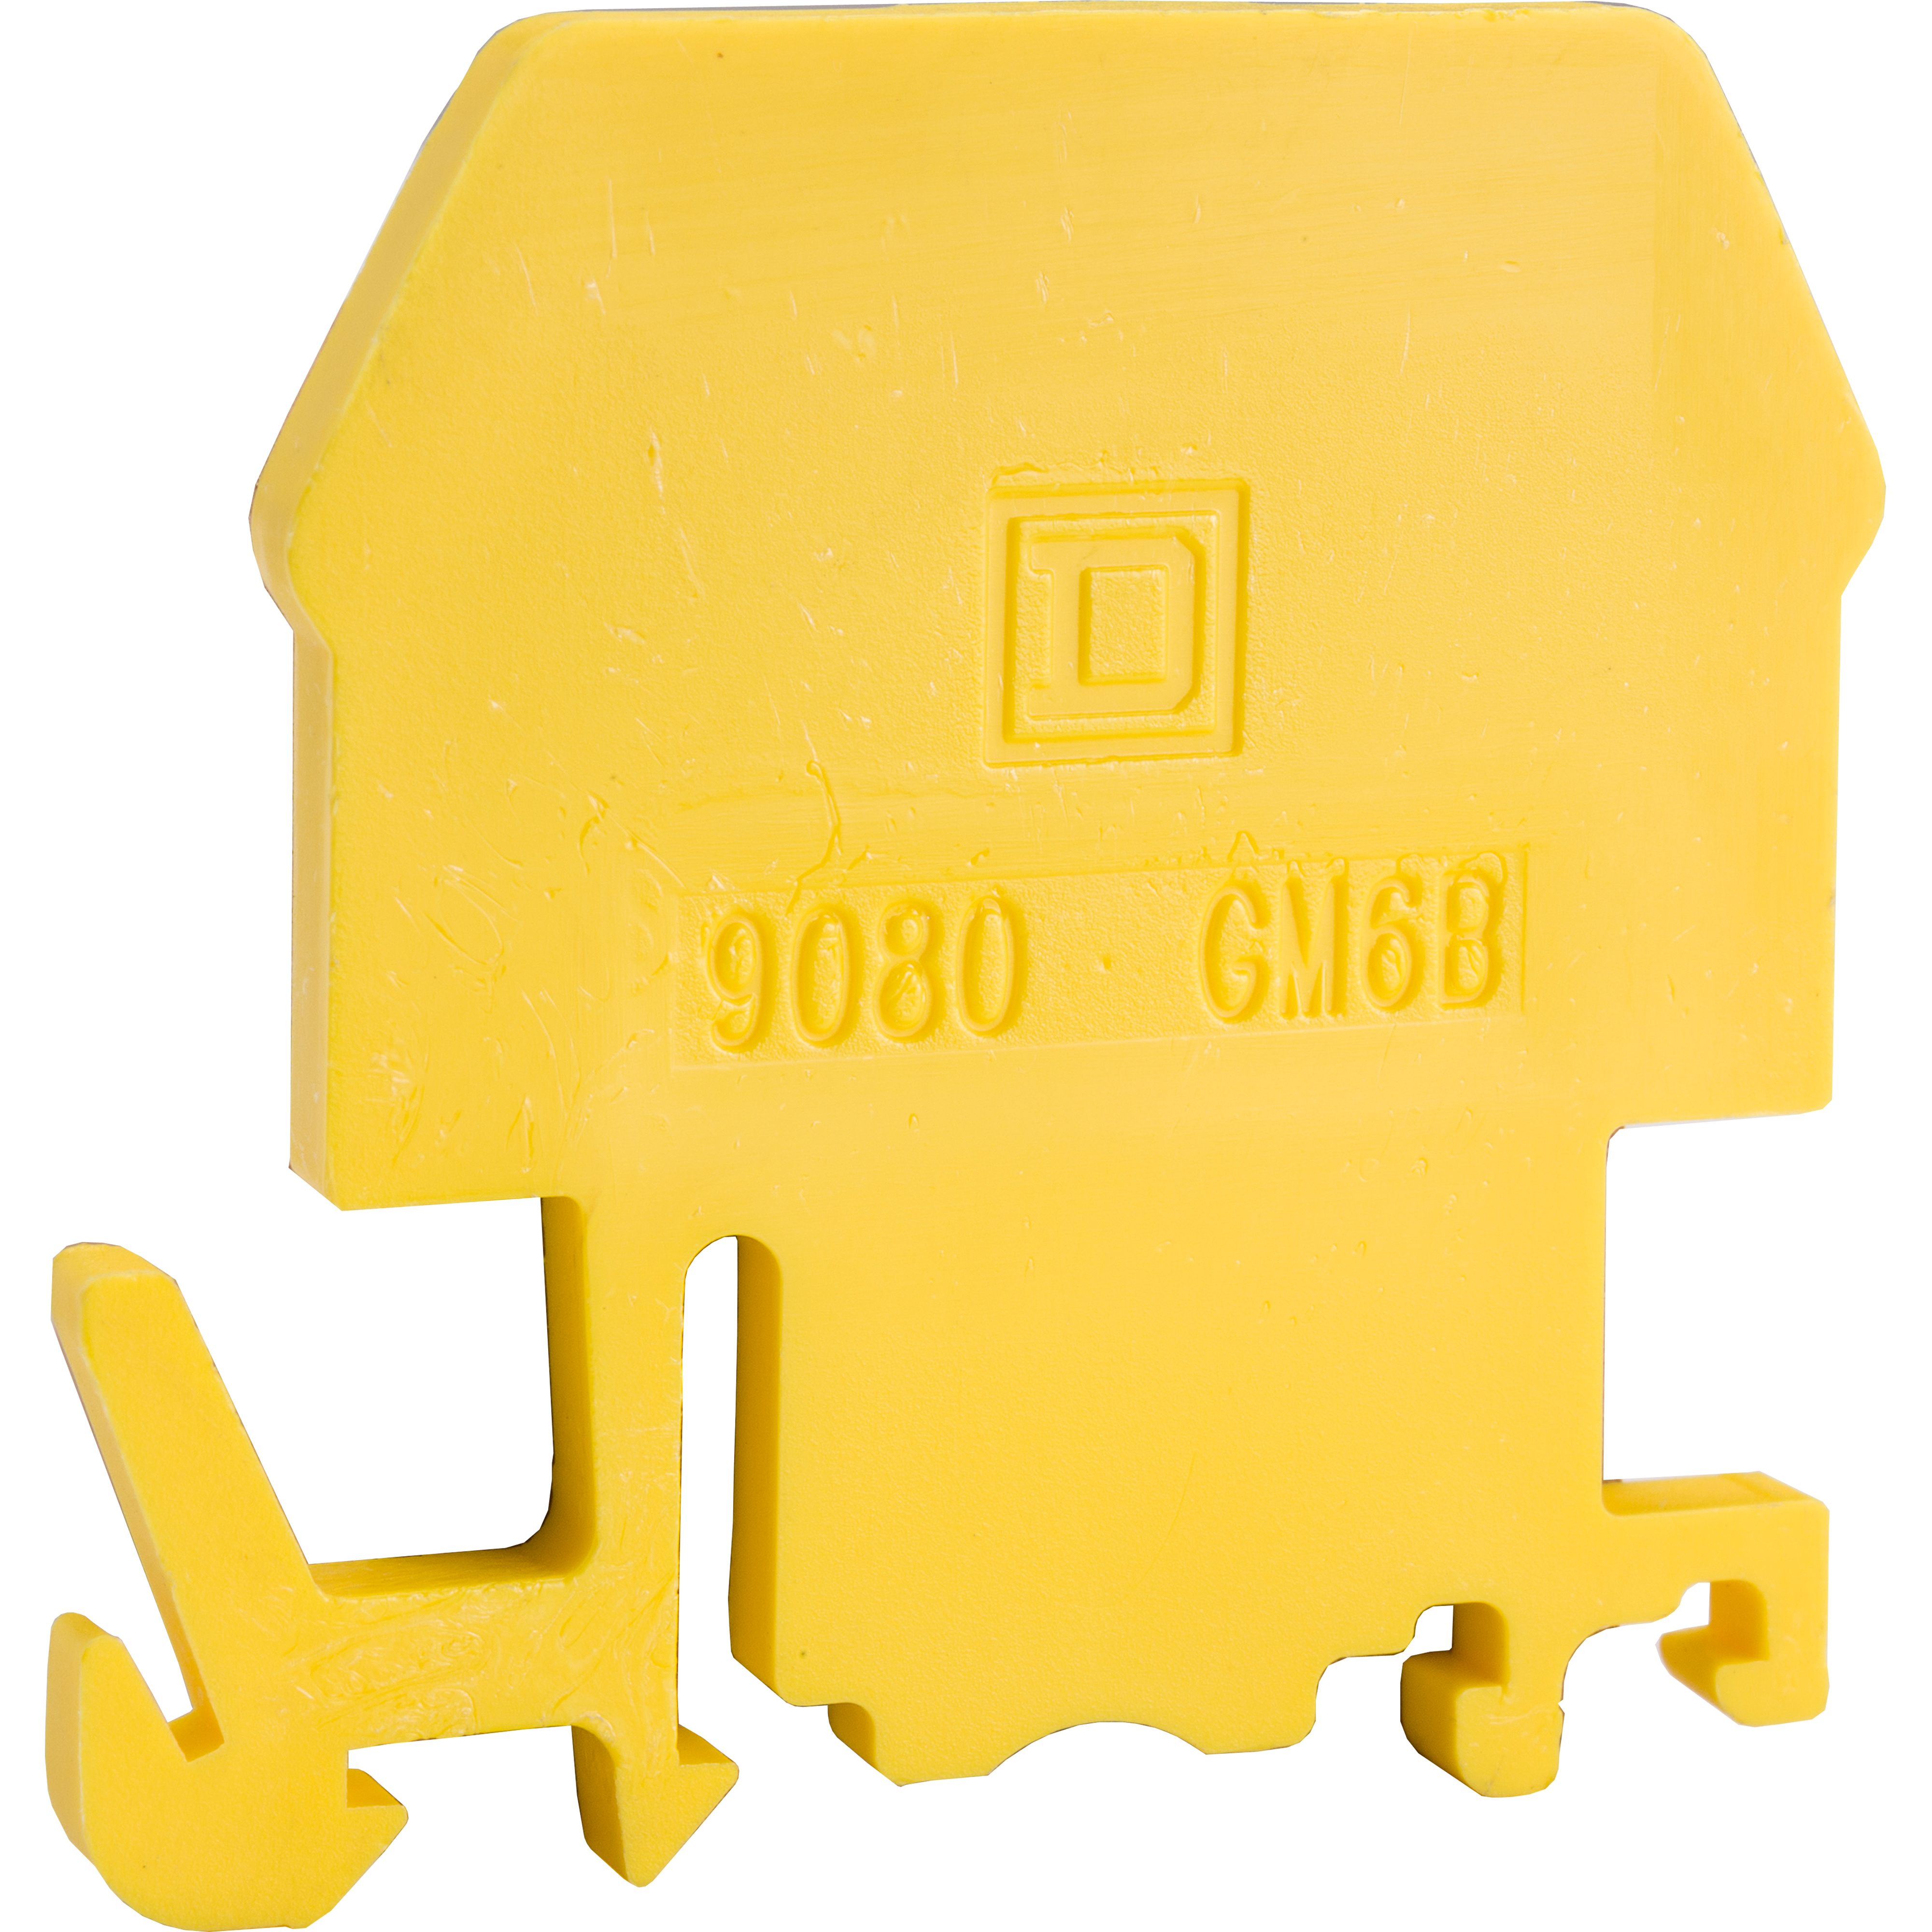 Terminal block, Linergy, end barrier, yellow color, for 9080GM6 or 9080GR6 terminal block